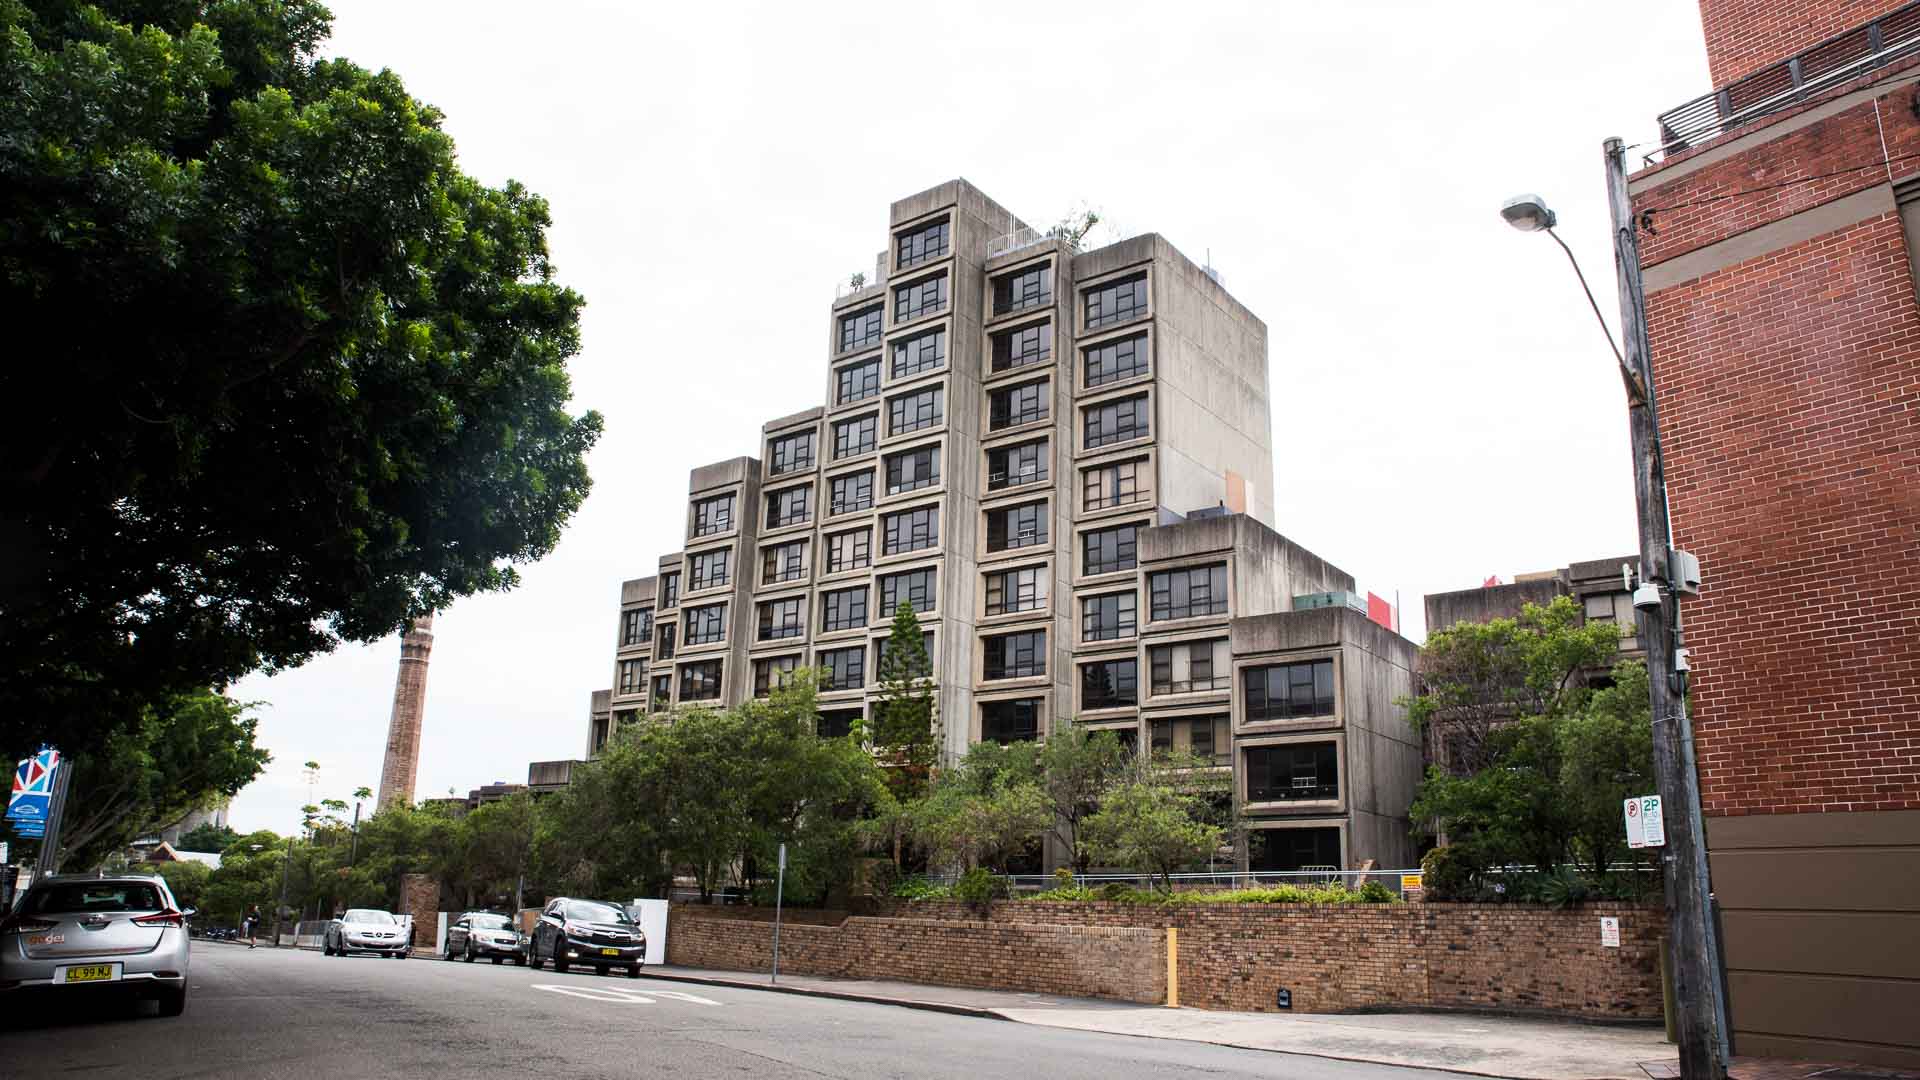 Sydney's Iconic Sirius Building Has Been Sold for $150 Million